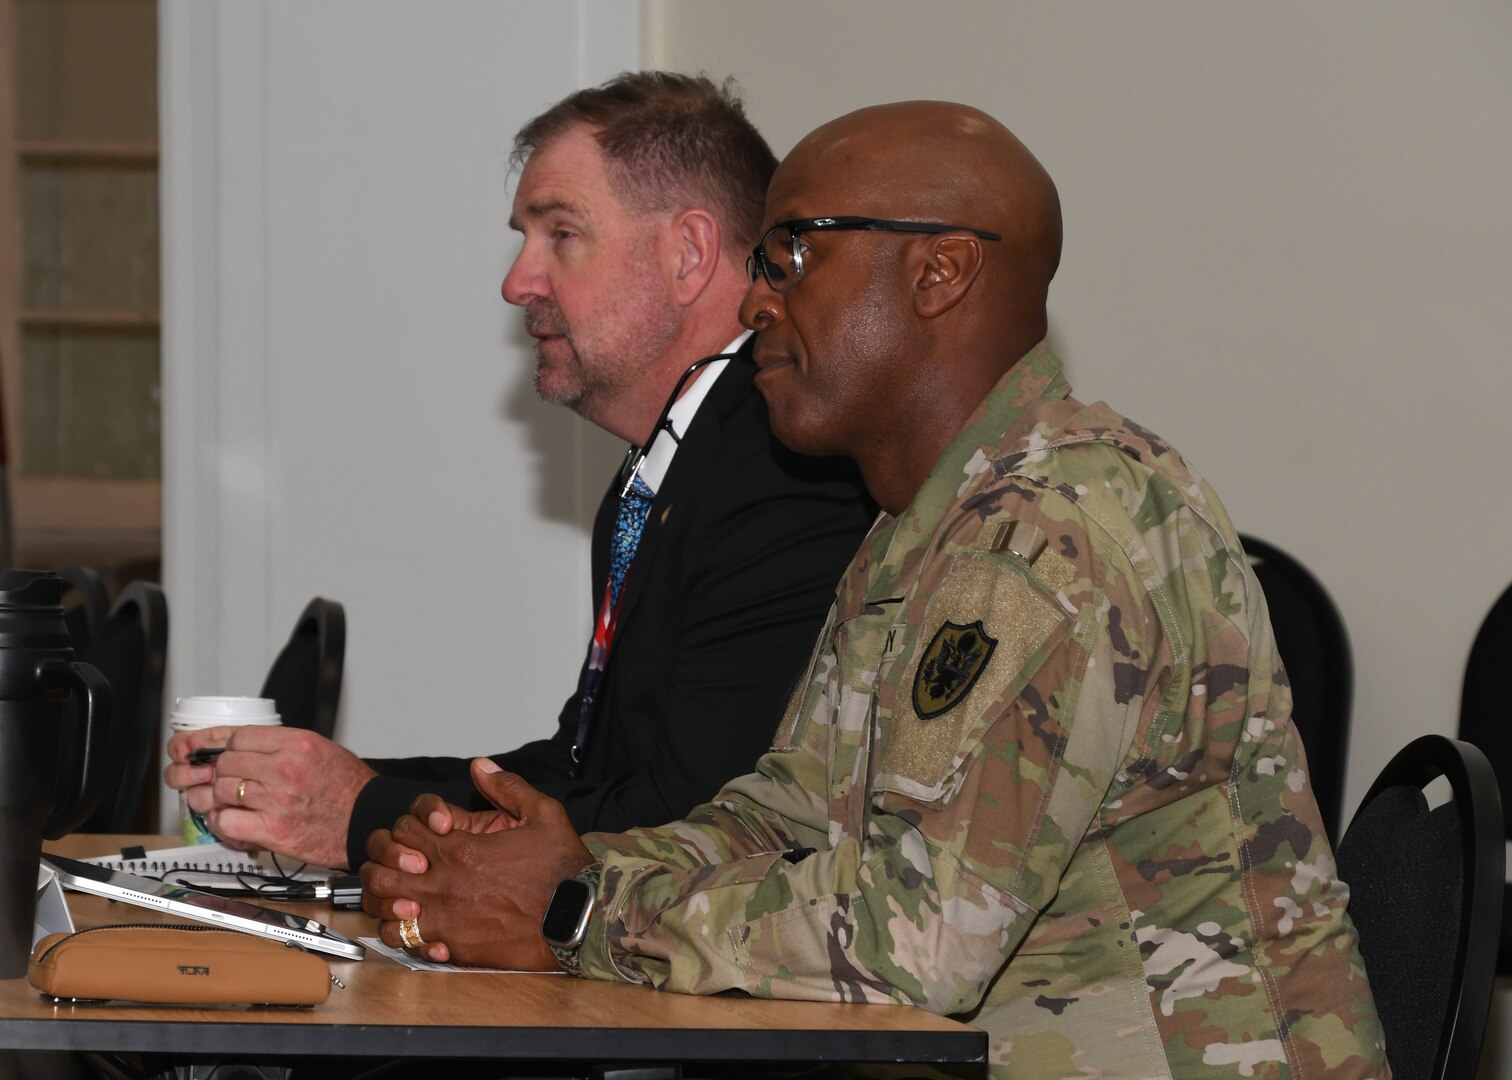 Defense Logistics Agency Disposition Services Director Mike Cannon in a civilian suite and U.S. Army Col. Andre L. Toussaint DLA Disposition Services deputy director, in his Army uniform, sit at a table and listen to a conversation at their command’s Senior Leader Summit held in Battle Creek, Michigan.